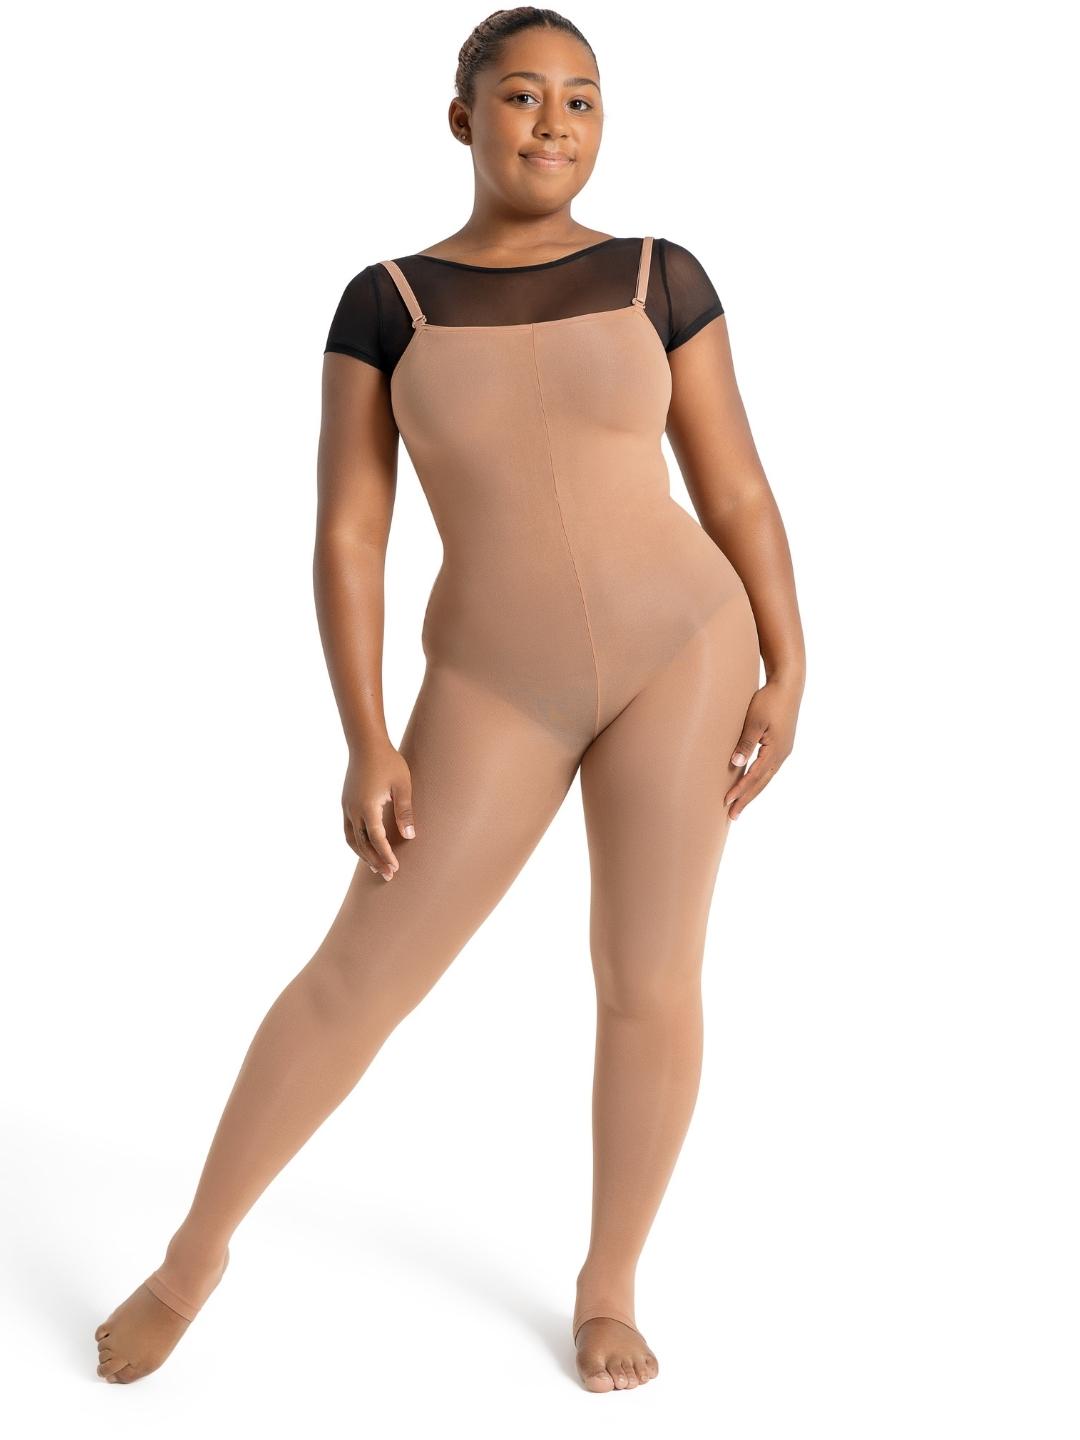 curt leman recommends leotard and tights pics pic